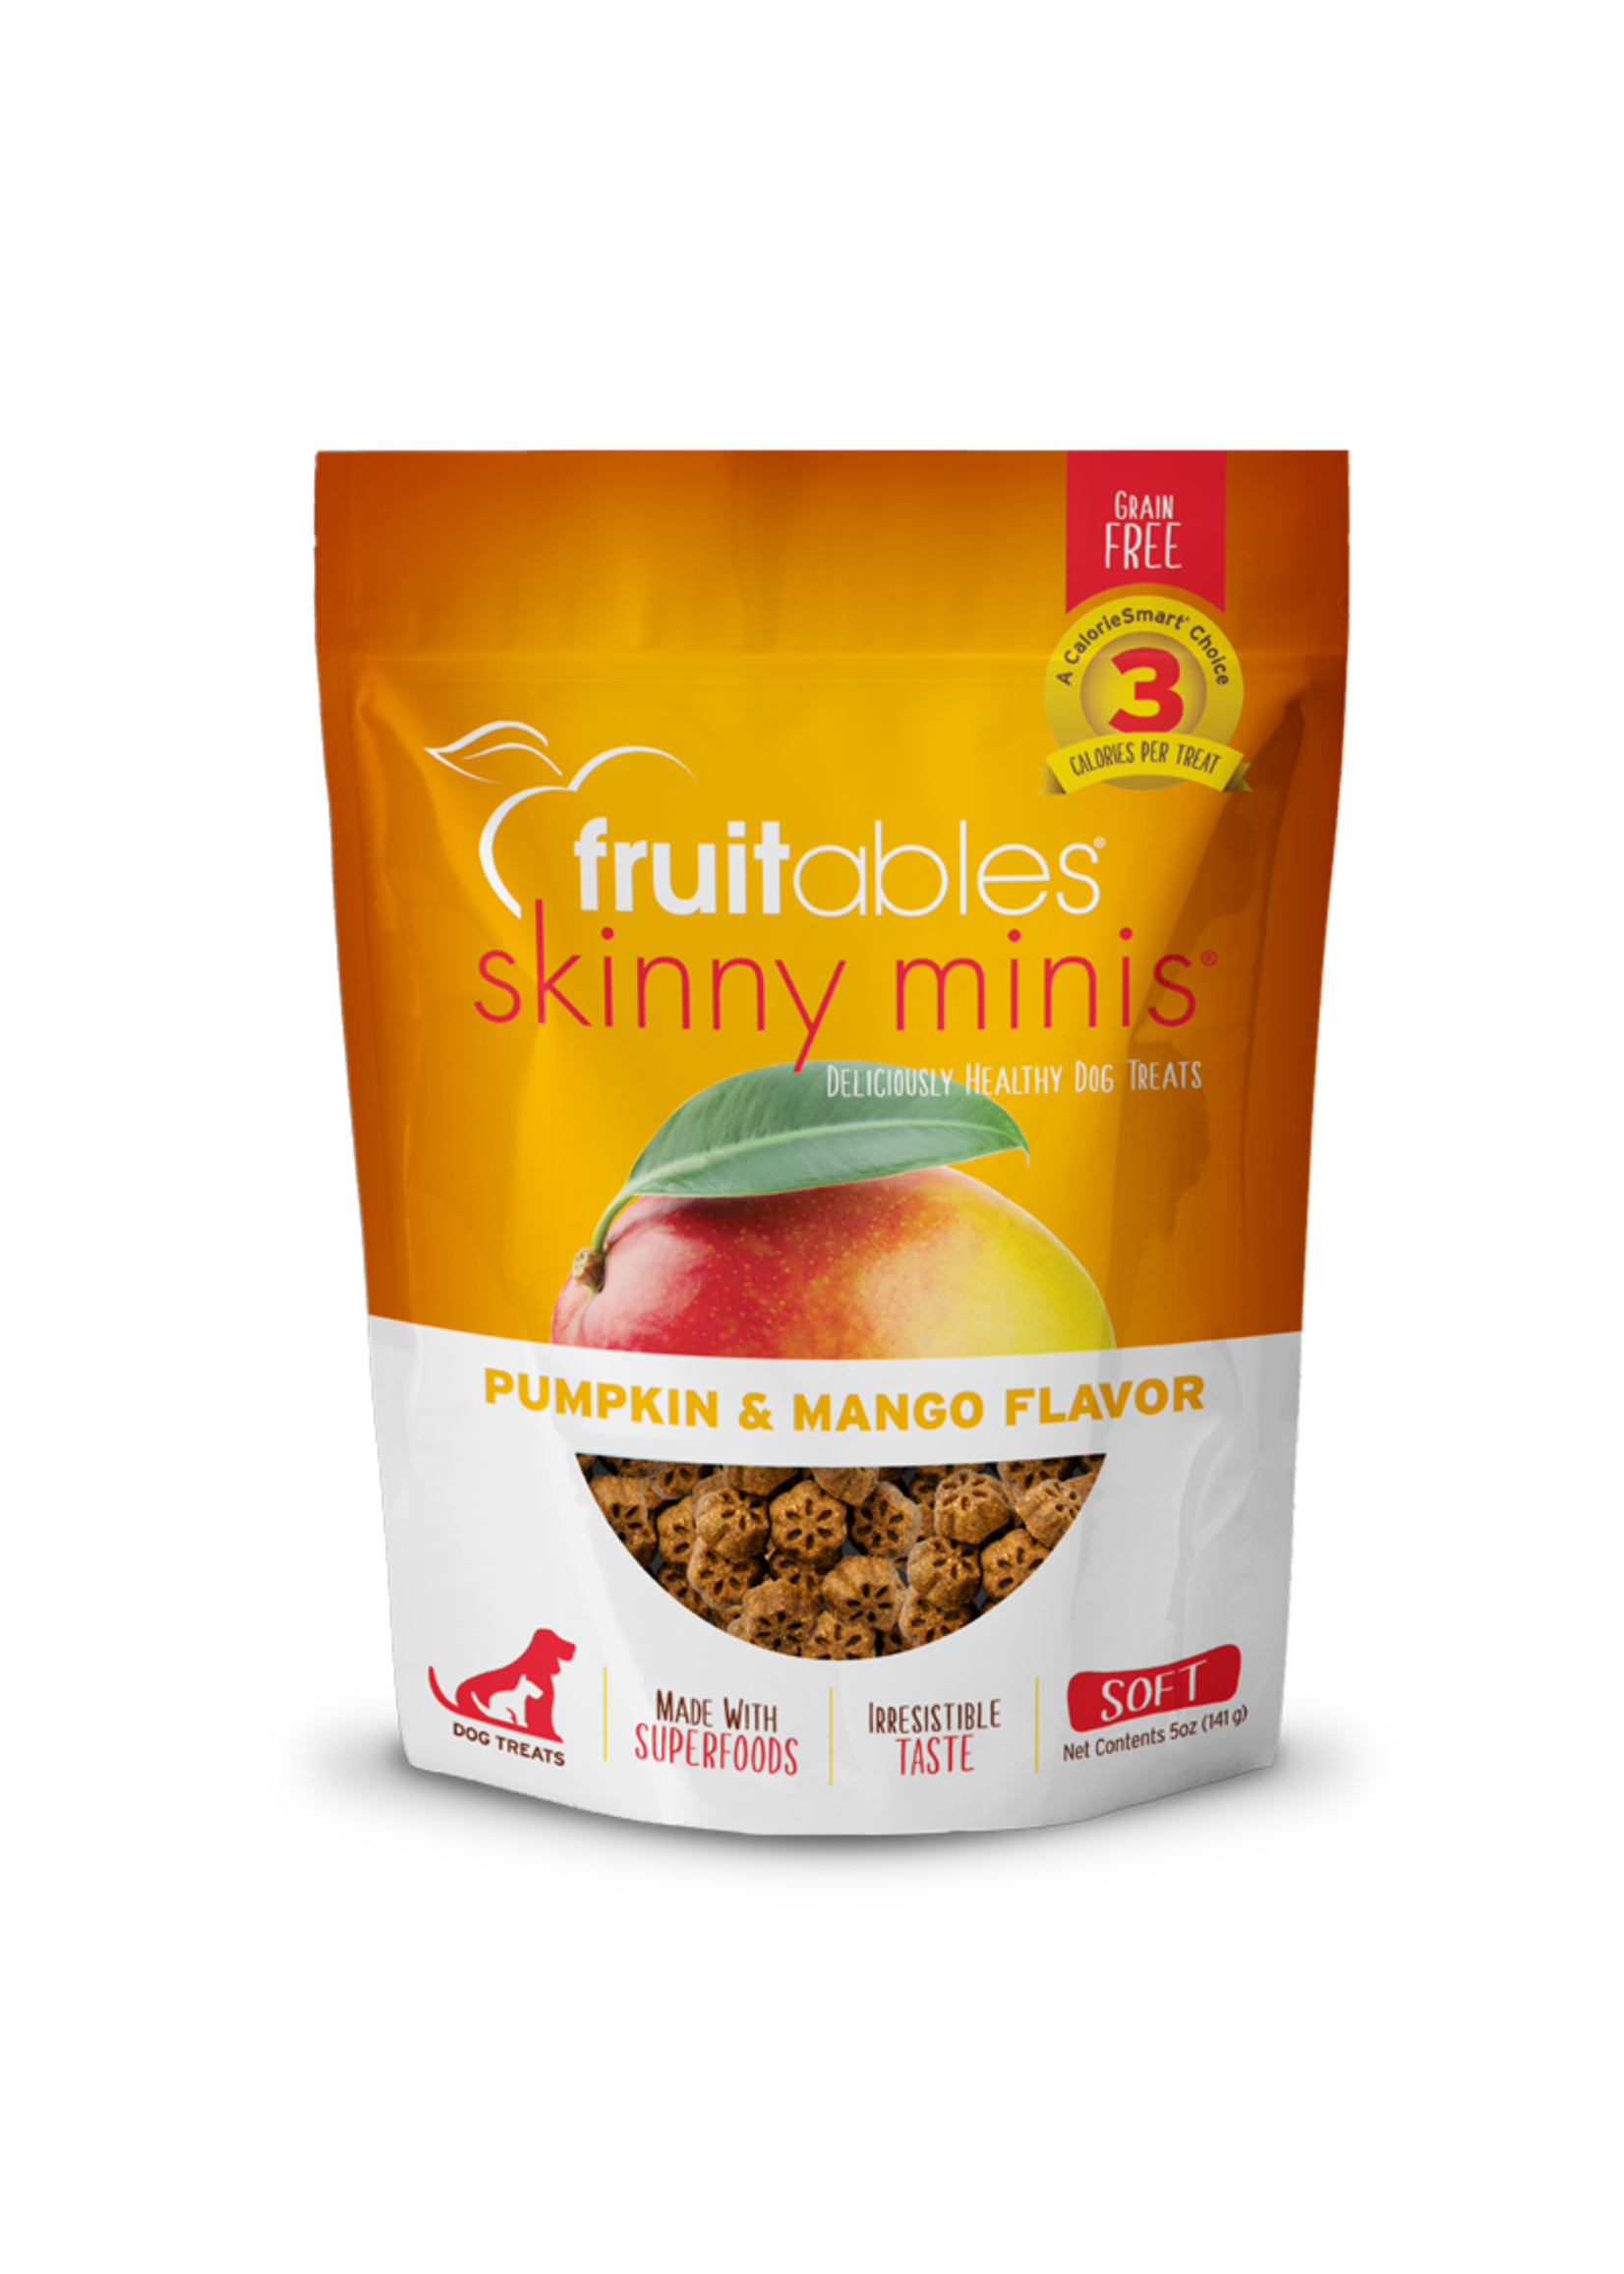 Fruitables Fruitables Dog Skinny Minis Chewy Treats